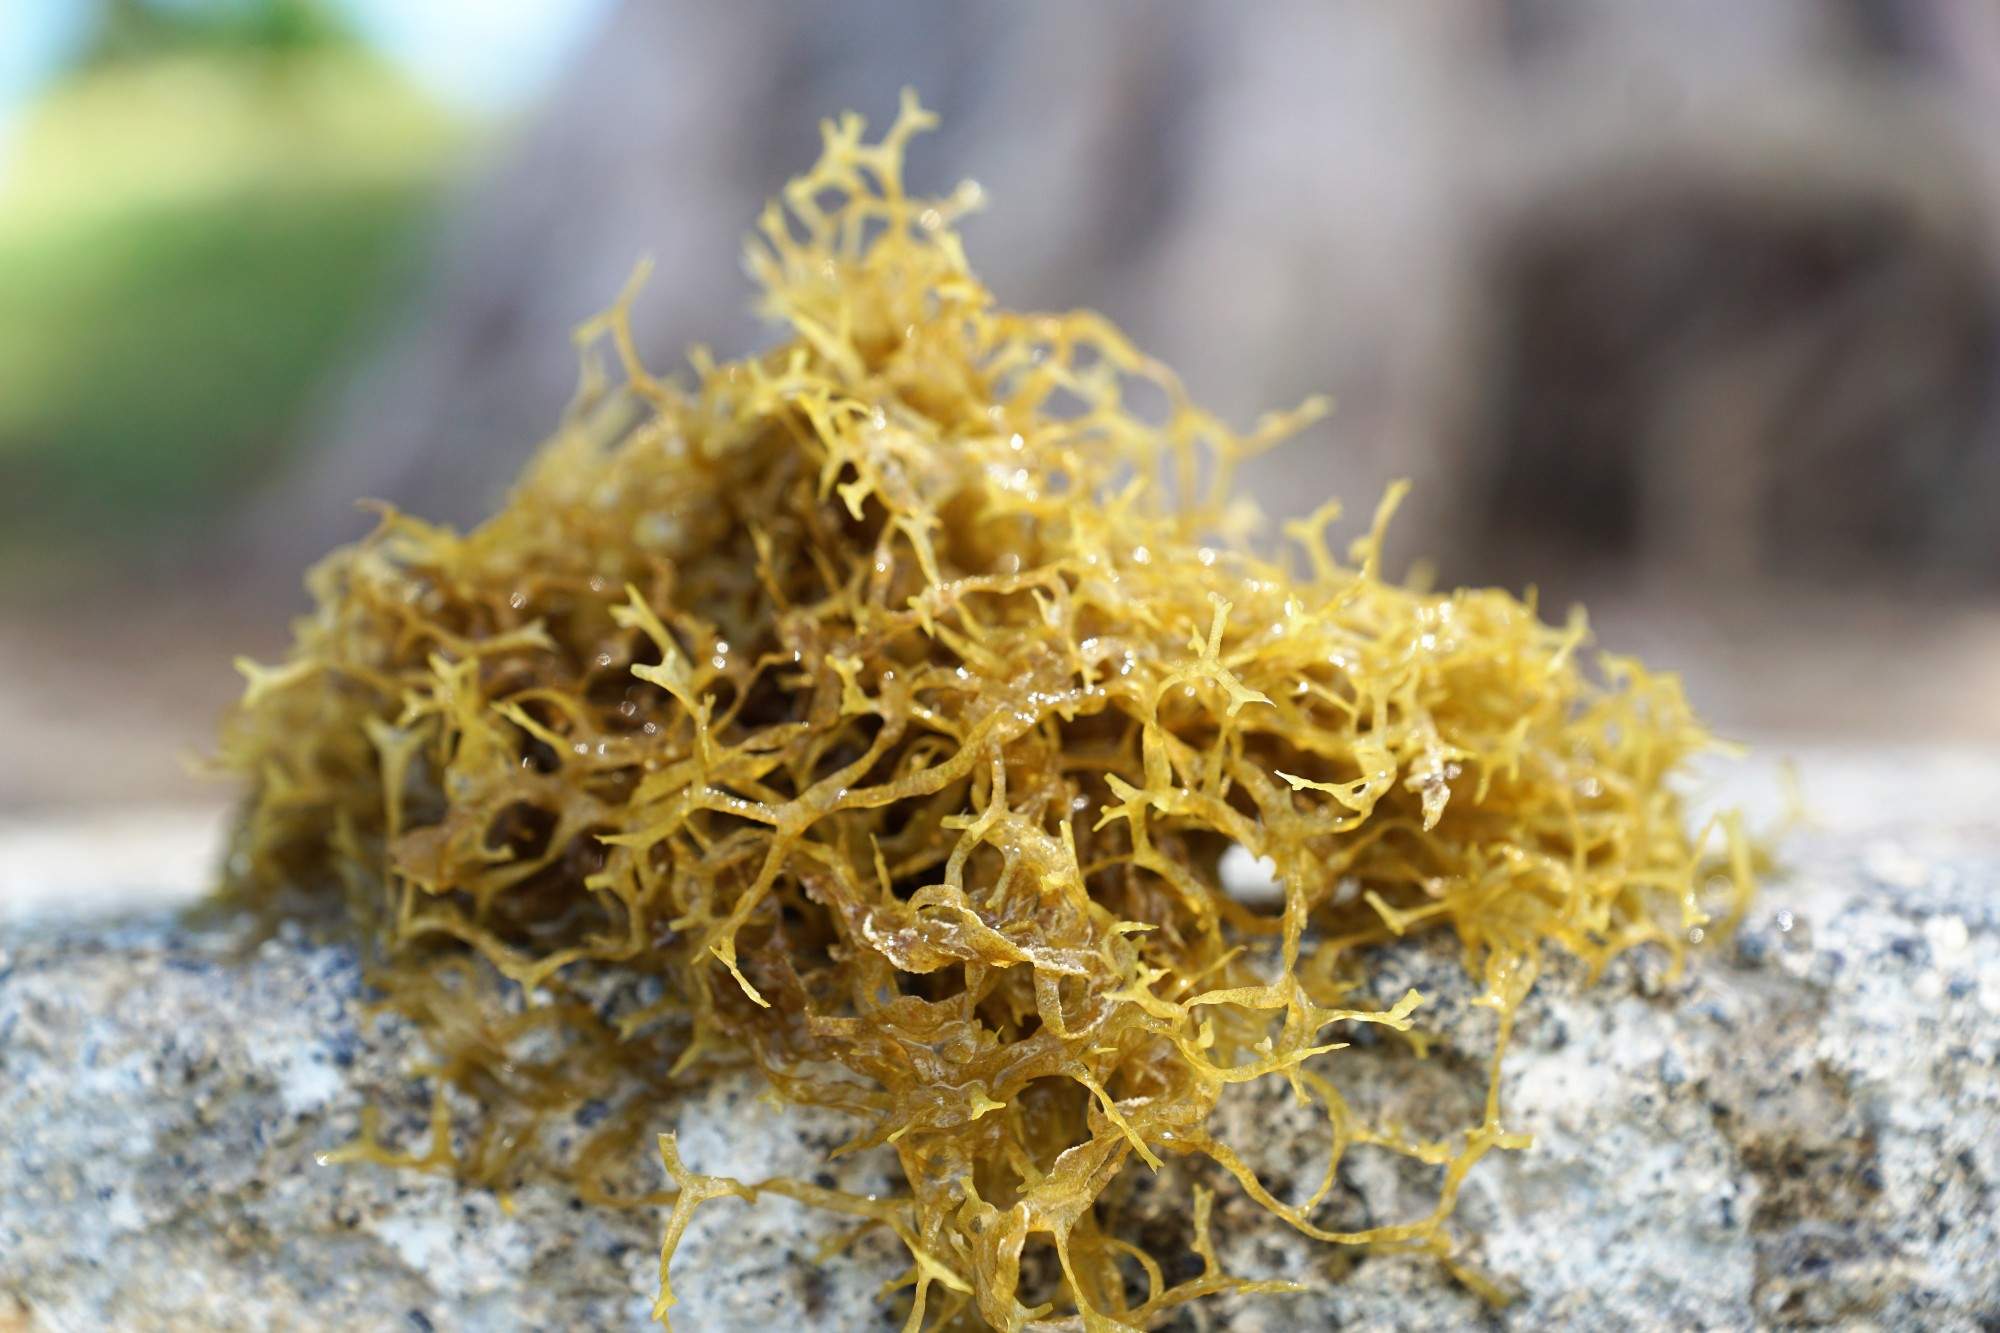 What Is Sea Moss?